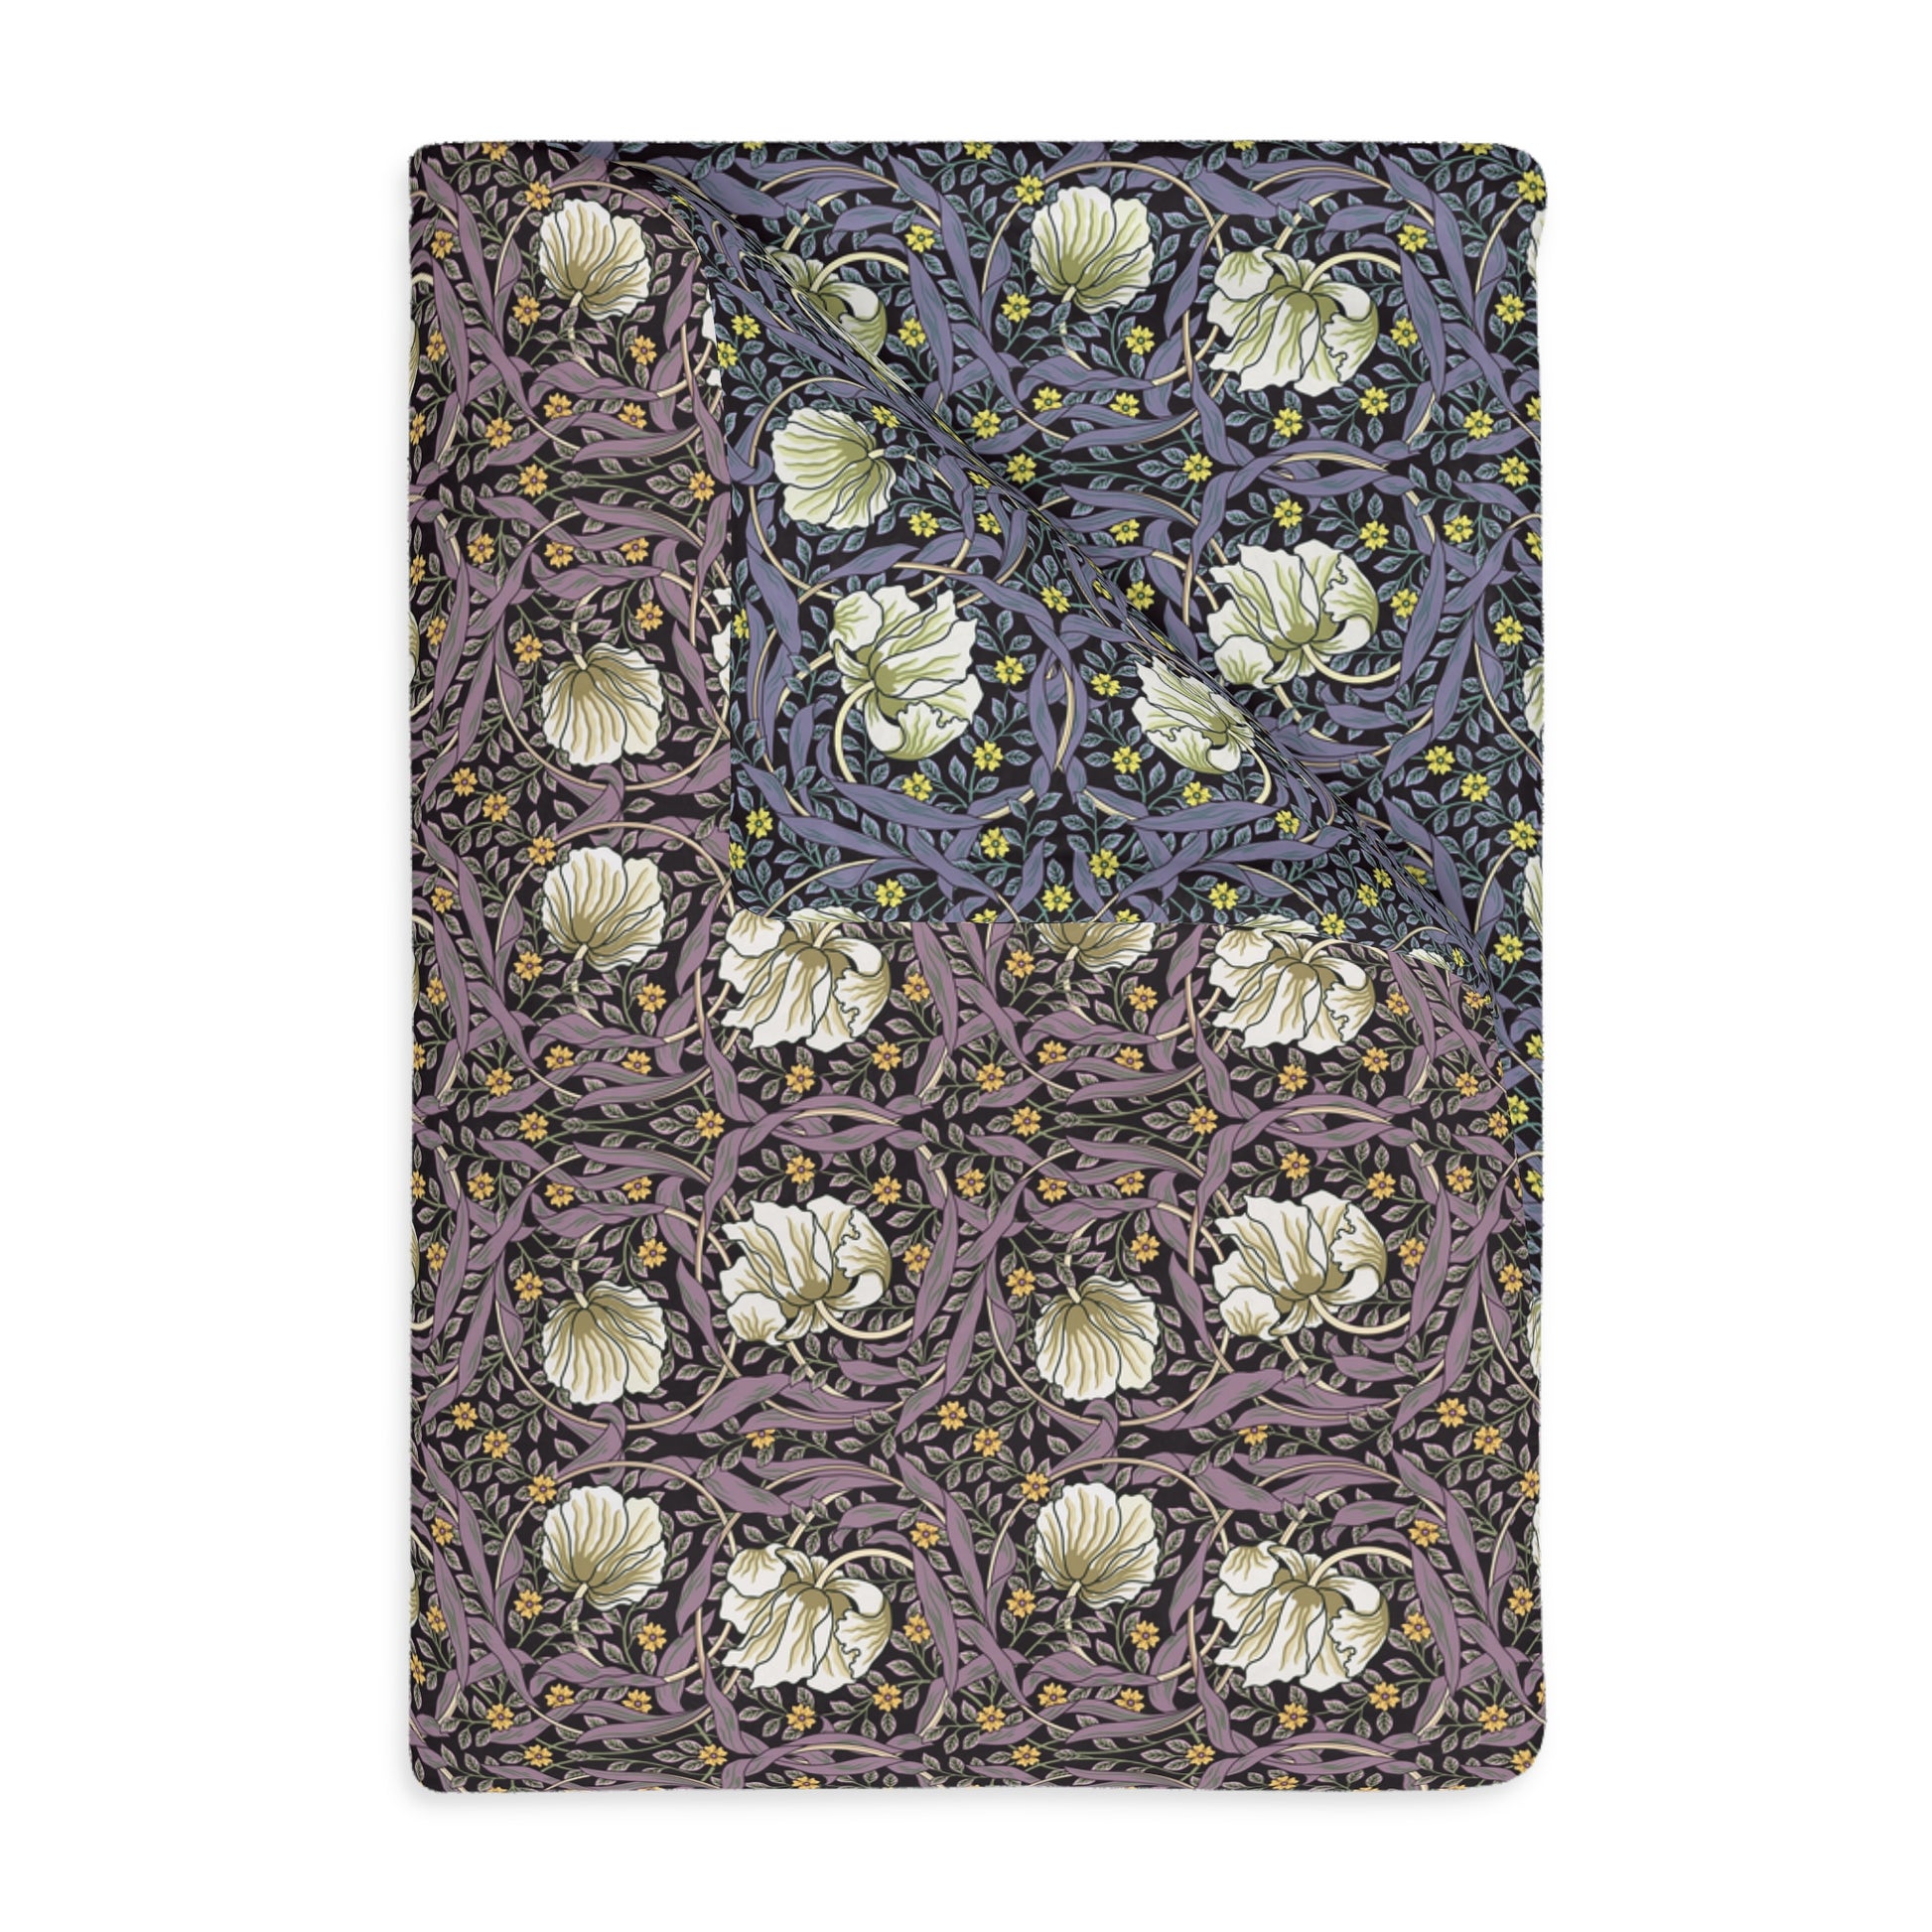 william-morris-co-luxury-velveteen-minky-blanket-two-sided-print-pimpernel-collection-rosewood-lavender-4